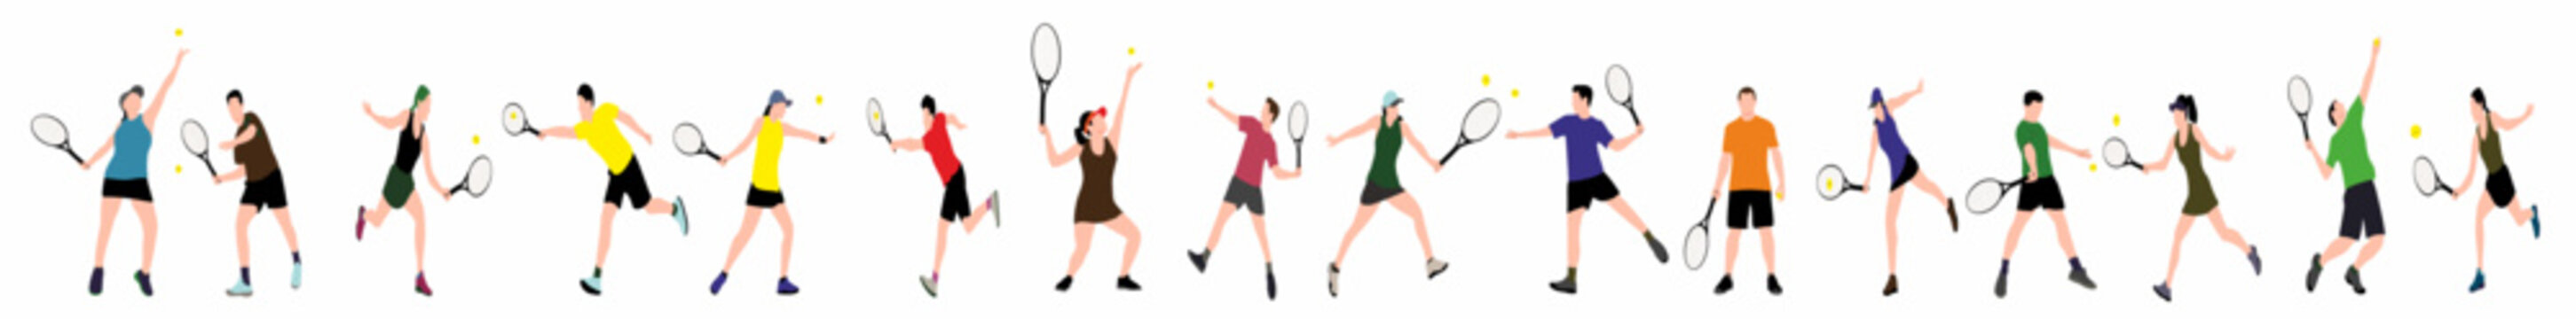 set of men and women tennis players on white background. Vector illustration